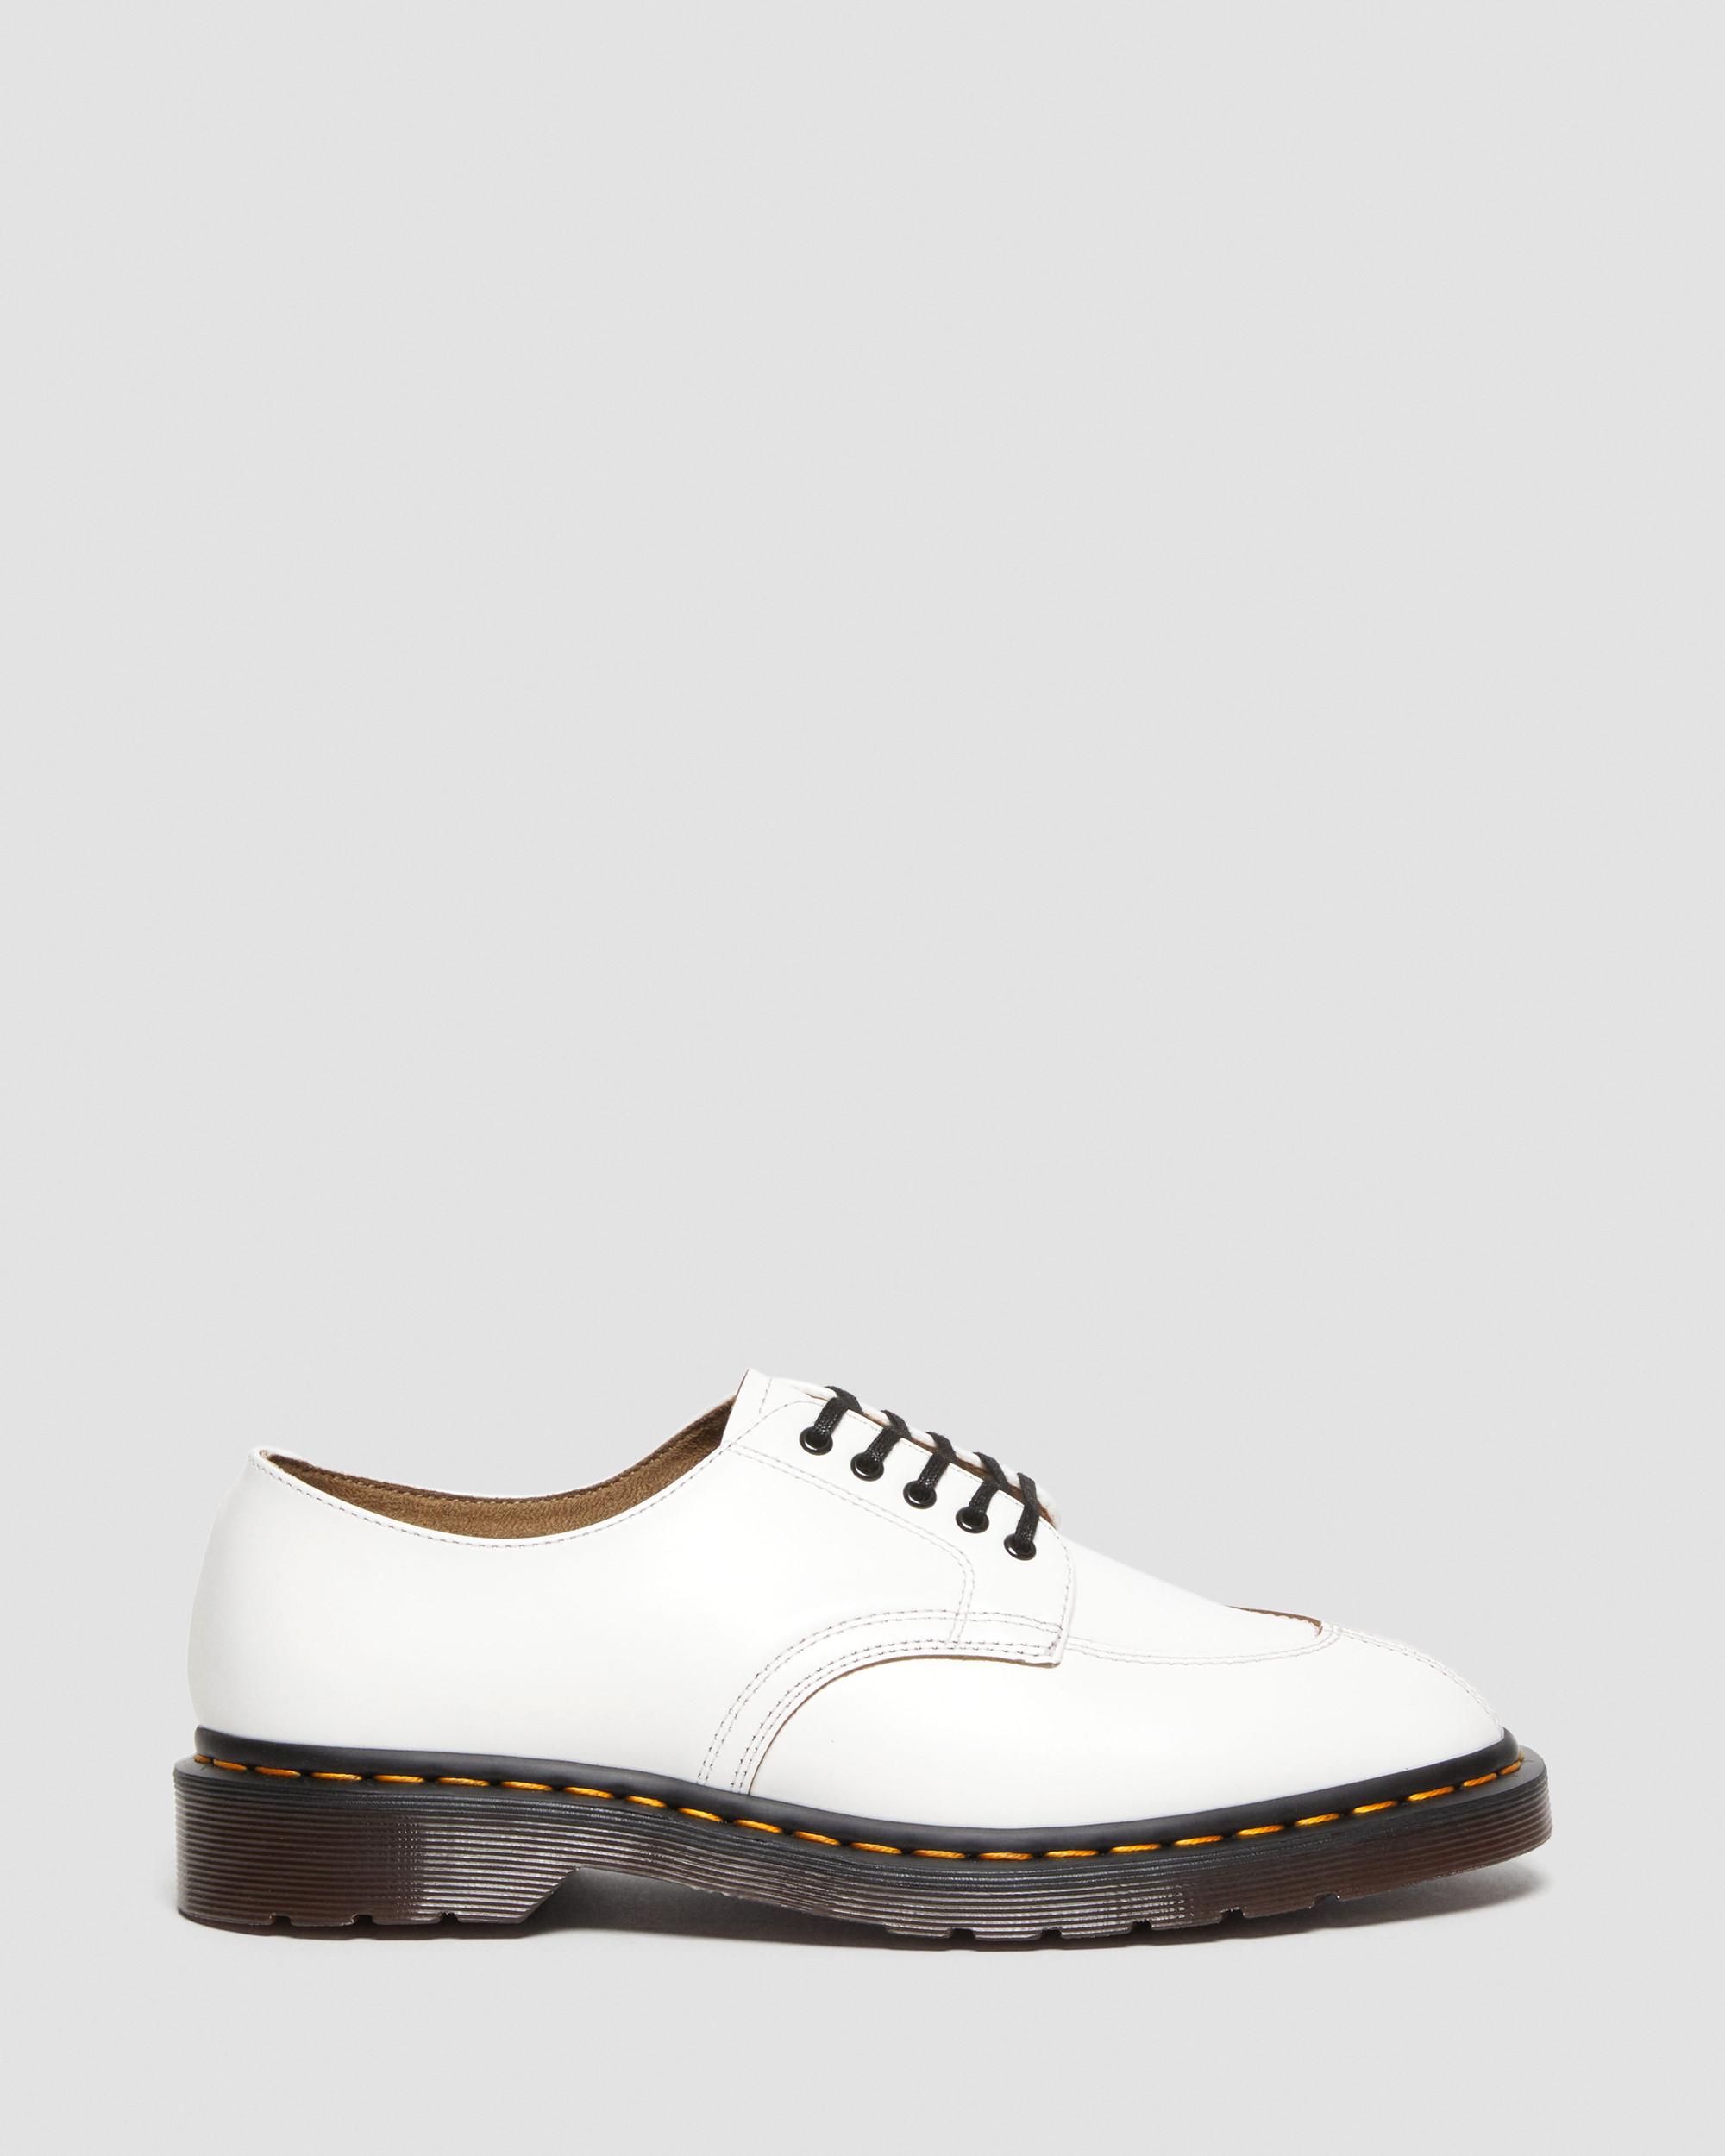 2046 Vintage Smooth Leather Oxford Shoes in White